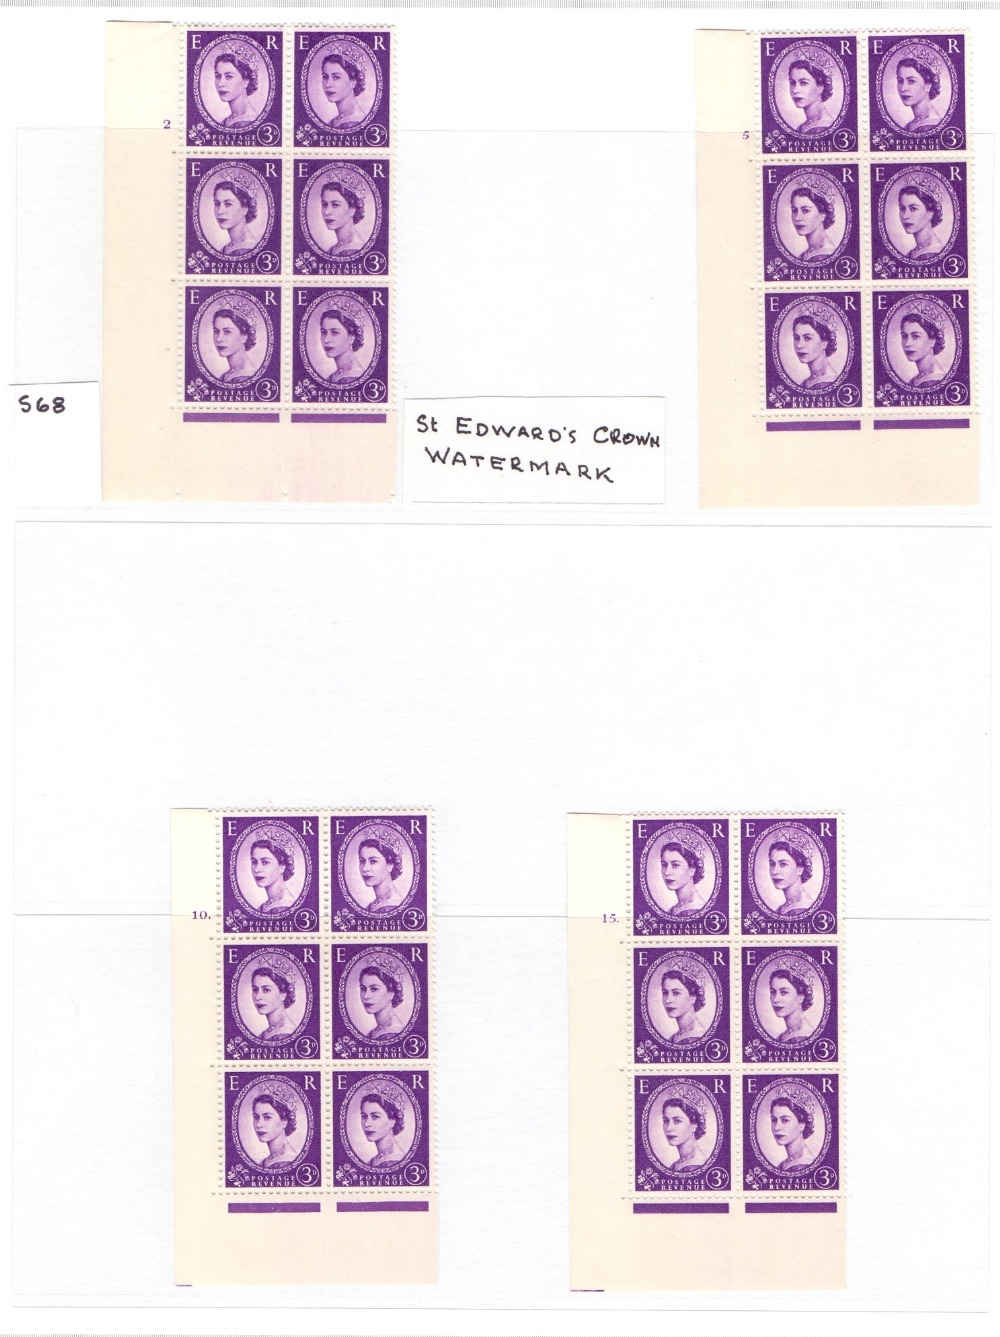 GREAT BRITAIN STAMPS : Wilding Collection, mint cylinder blocks, coils, singles, - Image 7 of 18